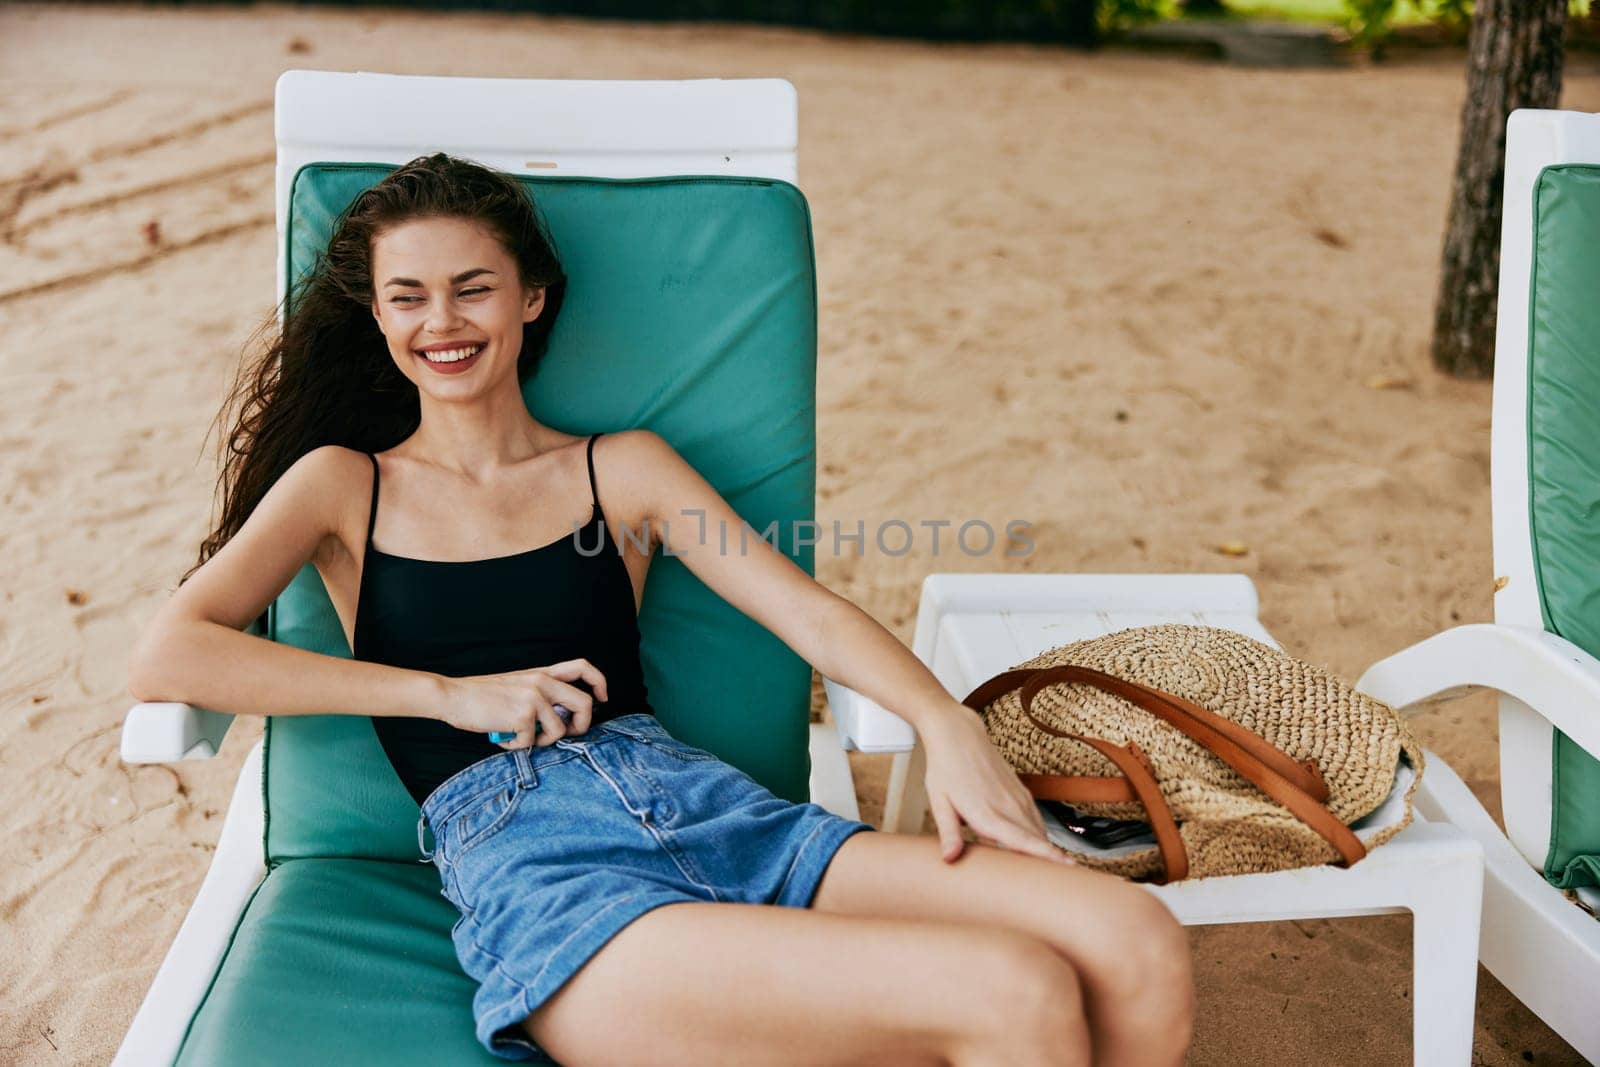 ocean woman young sand lifestyle lying girl sea travel vacation sunglasses rest sunbed resort resting summer beach smiling caucasian attractive sun